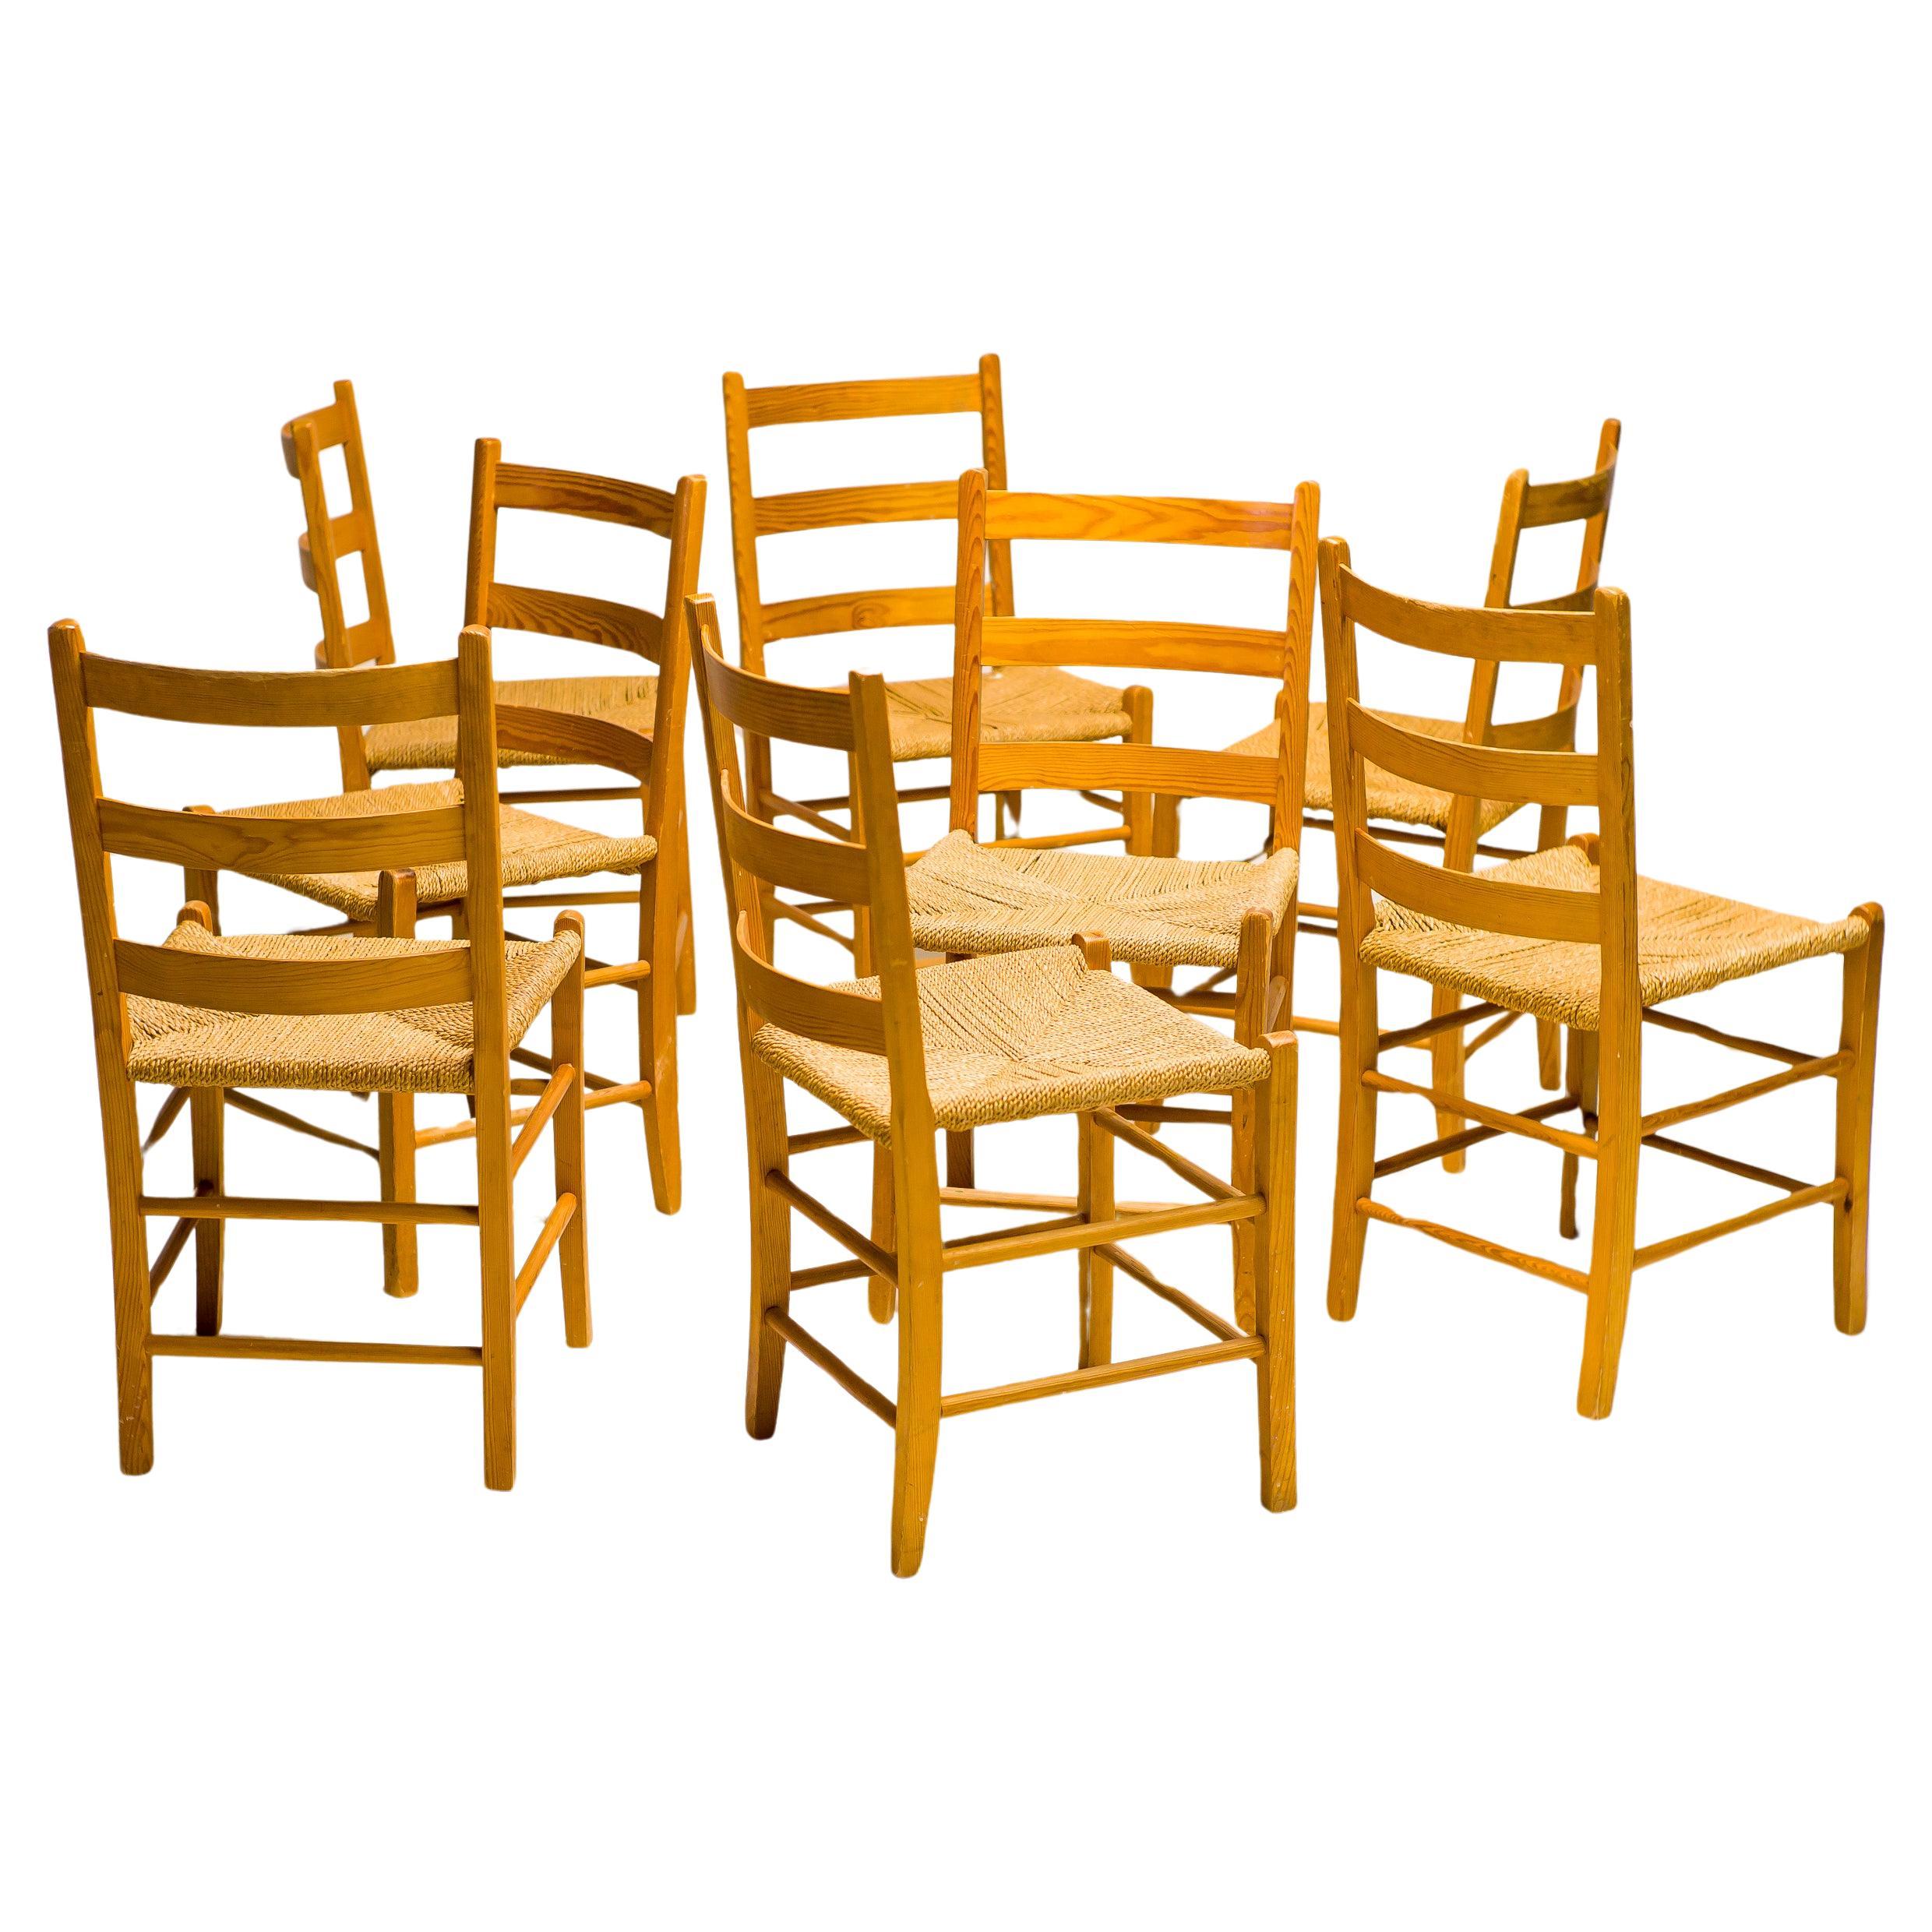 Set of Eight Oregon Pine Ladder Chairs For Sale